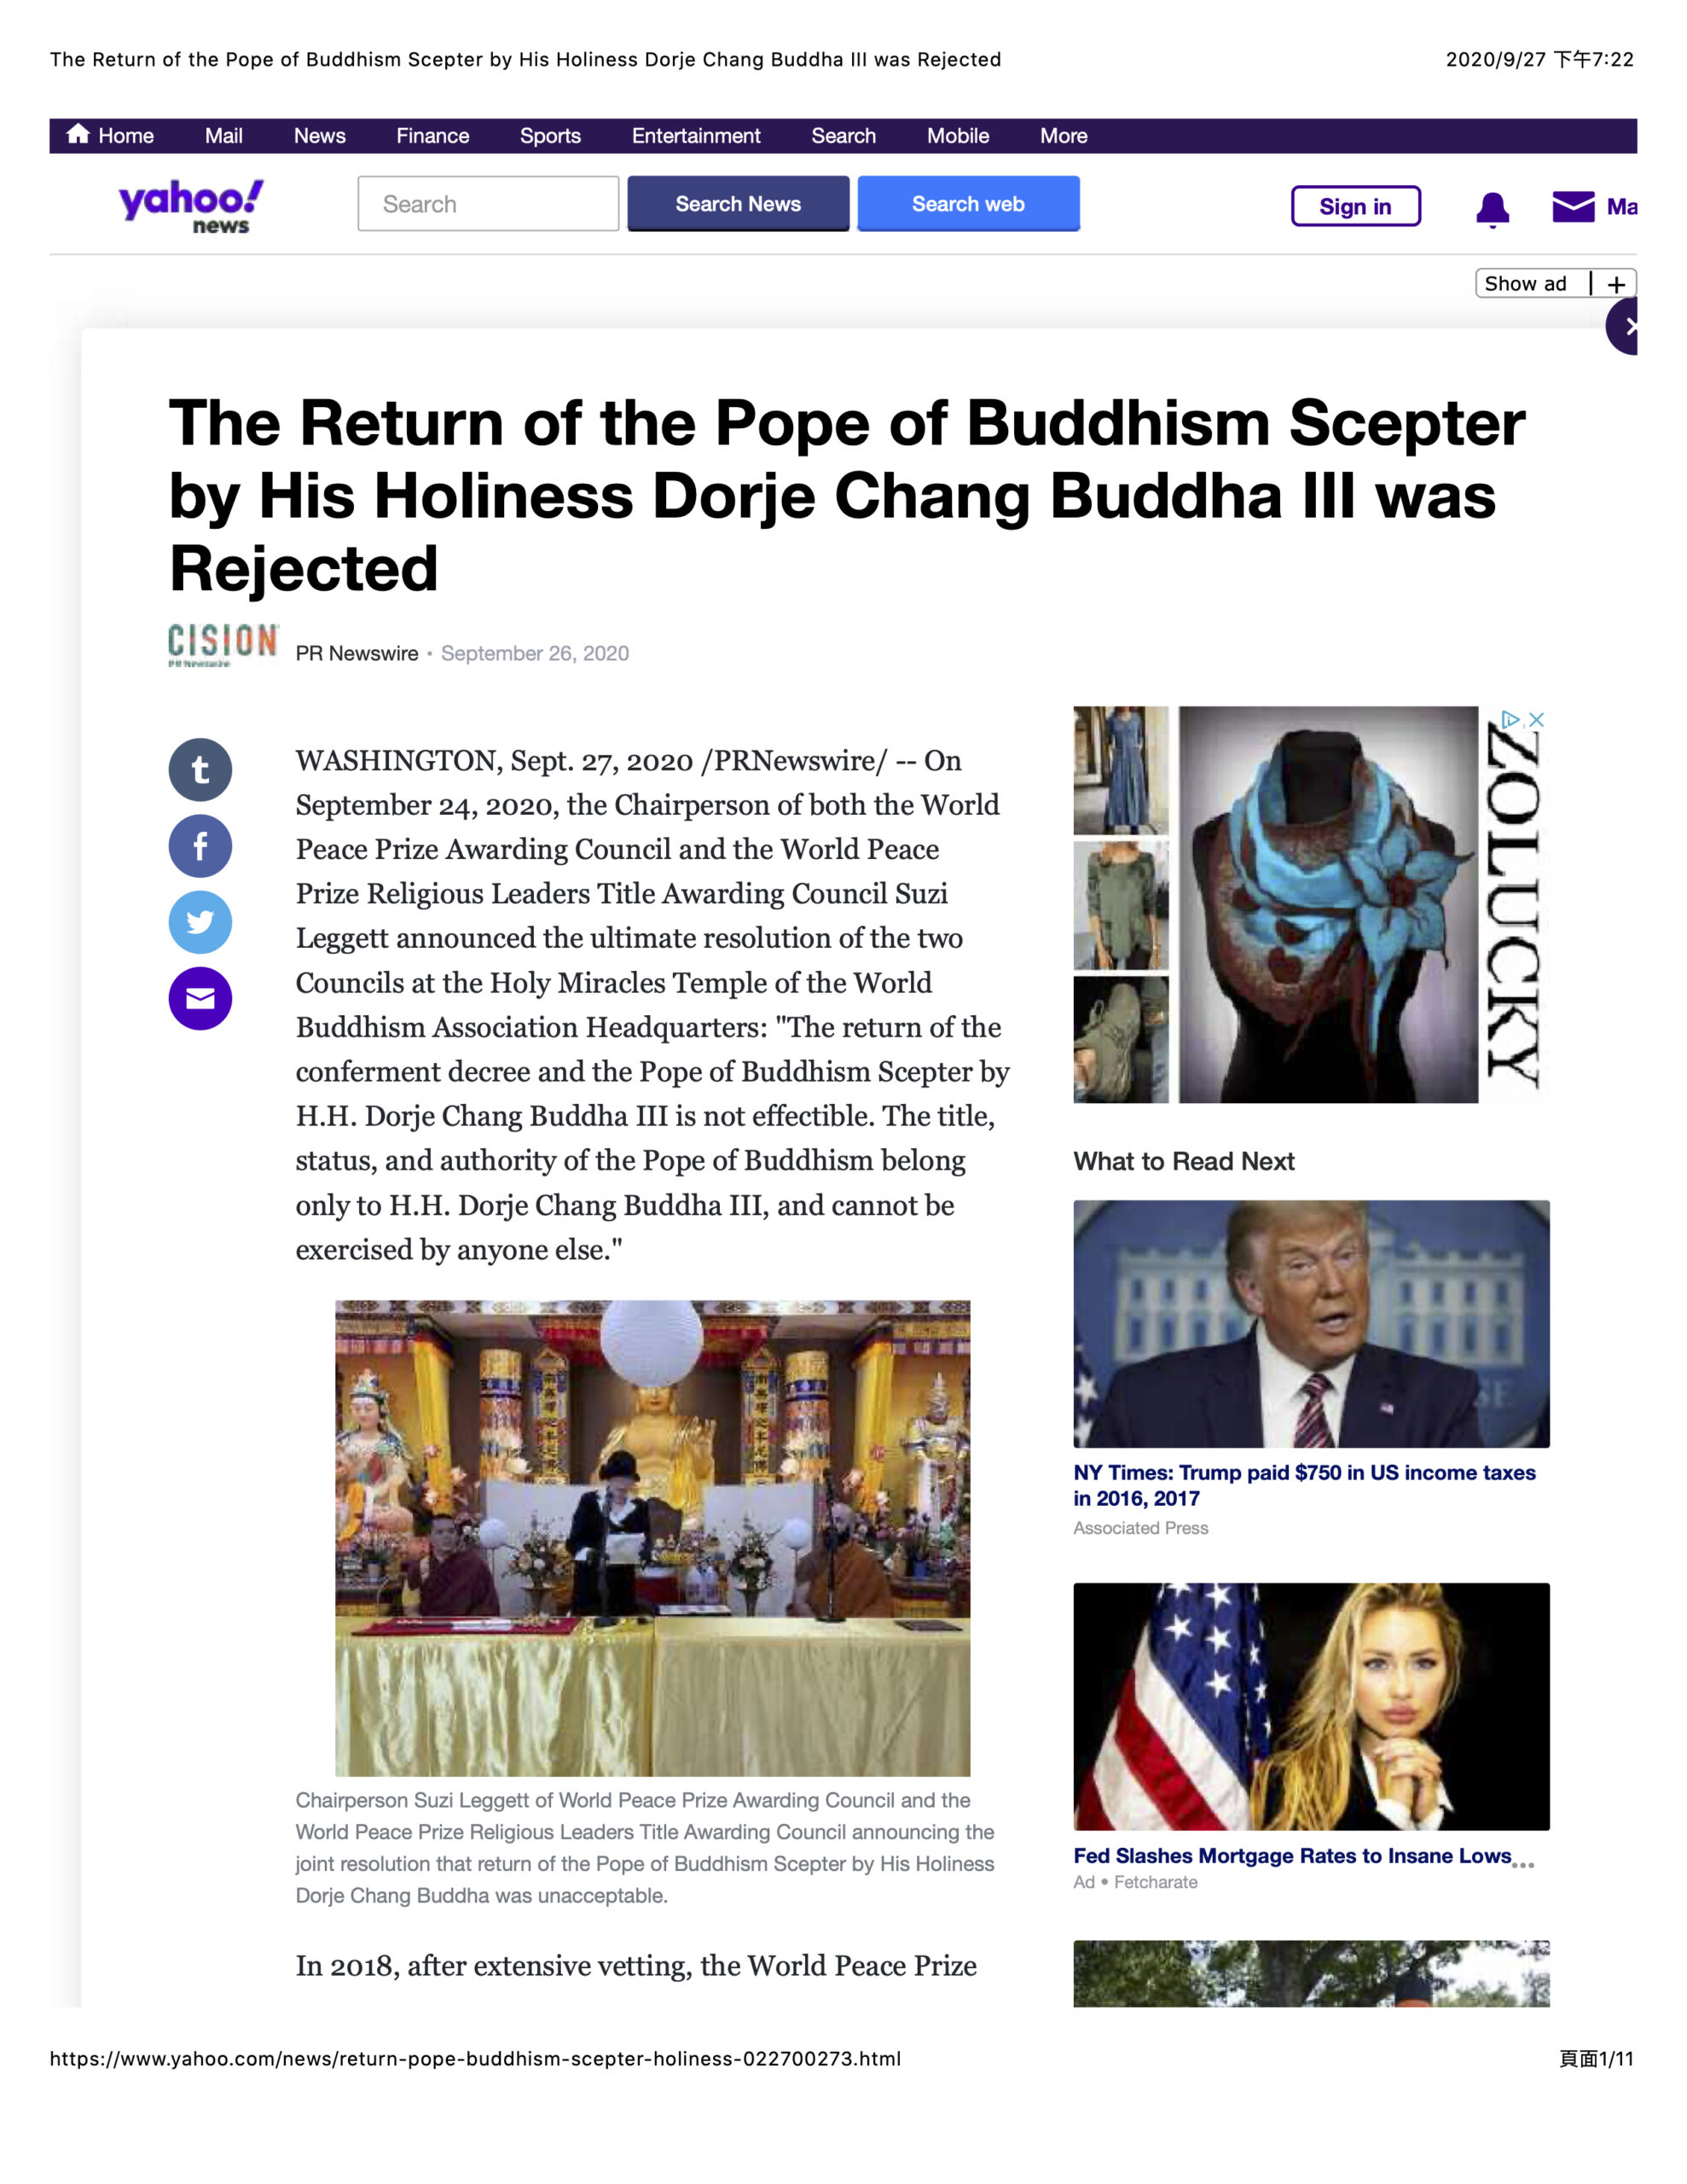 4-1. Yahoo News 雅虎新聞_The Return of the Pope of Buddhism Scepter_9-27-2020_s